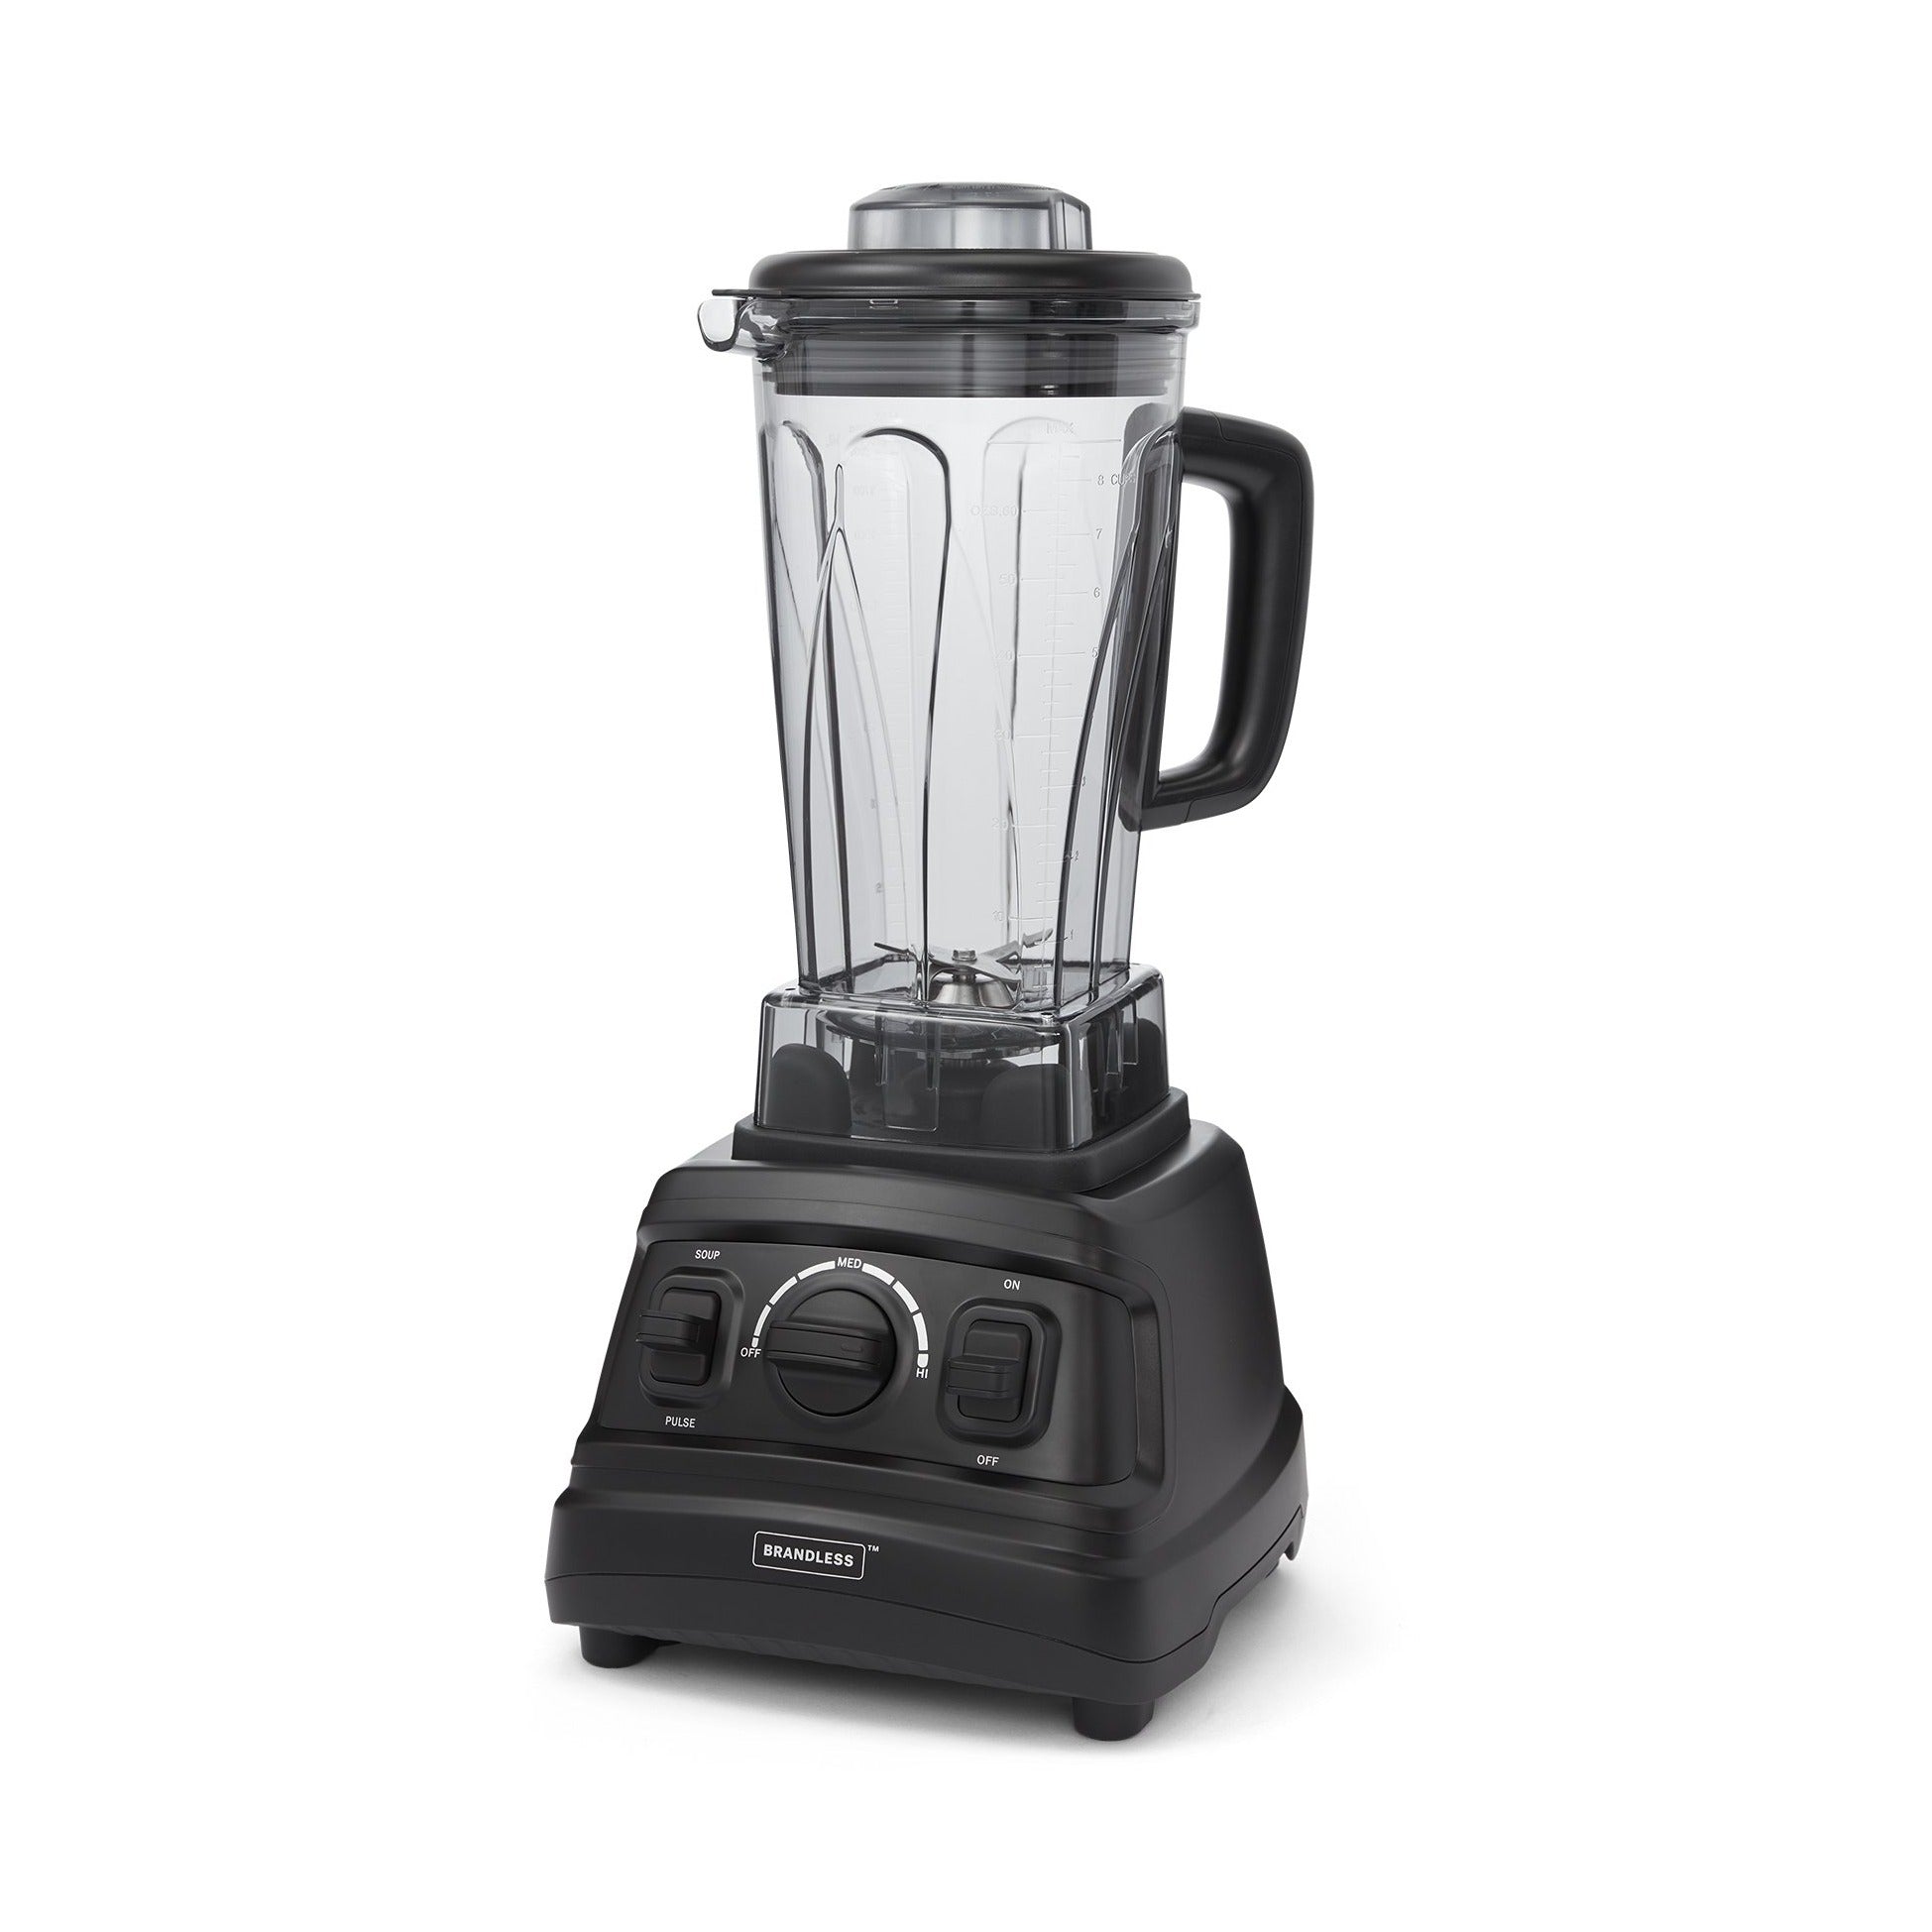 Pro-Blender.  Product photo of front of blender, showing the transparent Tritan 64 oz. carafe on top of the black motor base.  Front controls include an on/off switch, a soup/pulse switch, and a rotary speed dial.